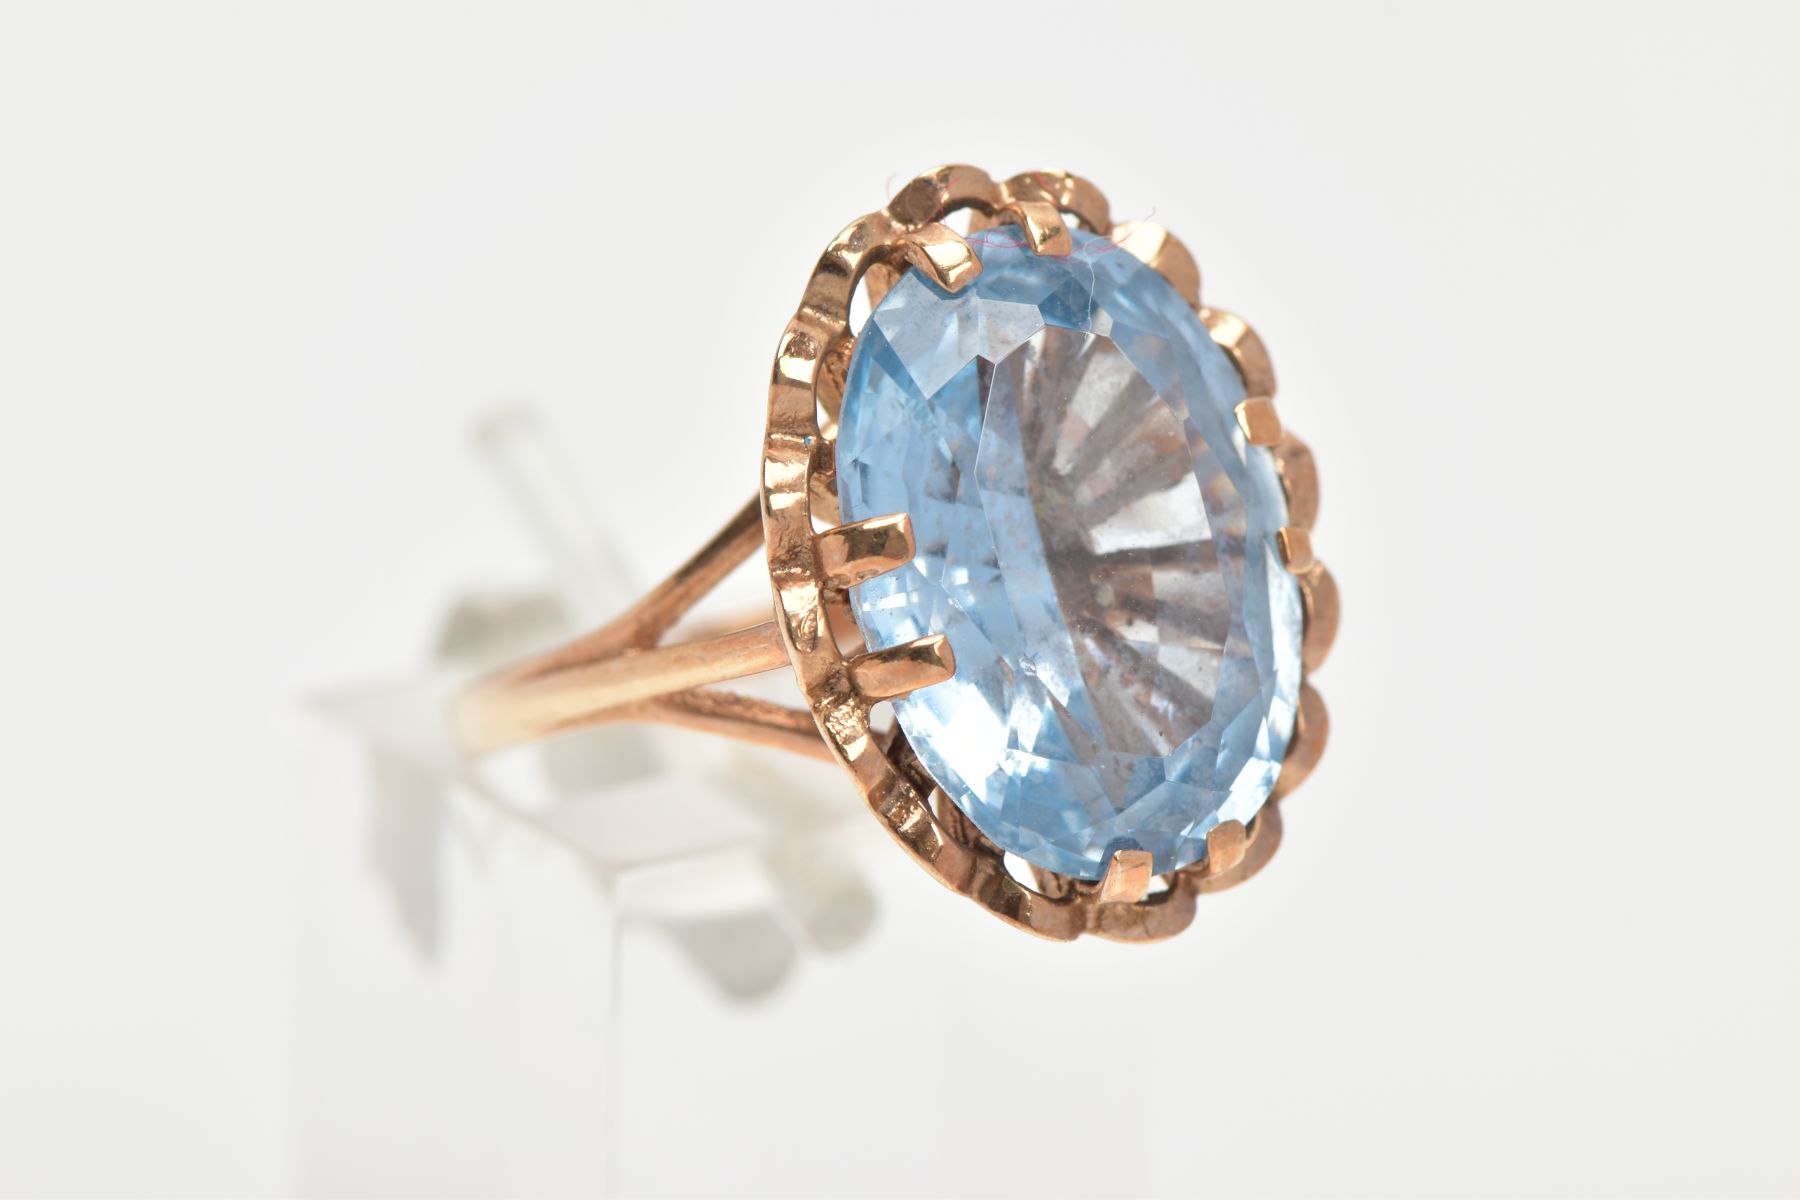 A TOPAZ DRESS RING, a large oval cut blue stone assessed as topaz, approximate length 17mm, - Image 4 of 4